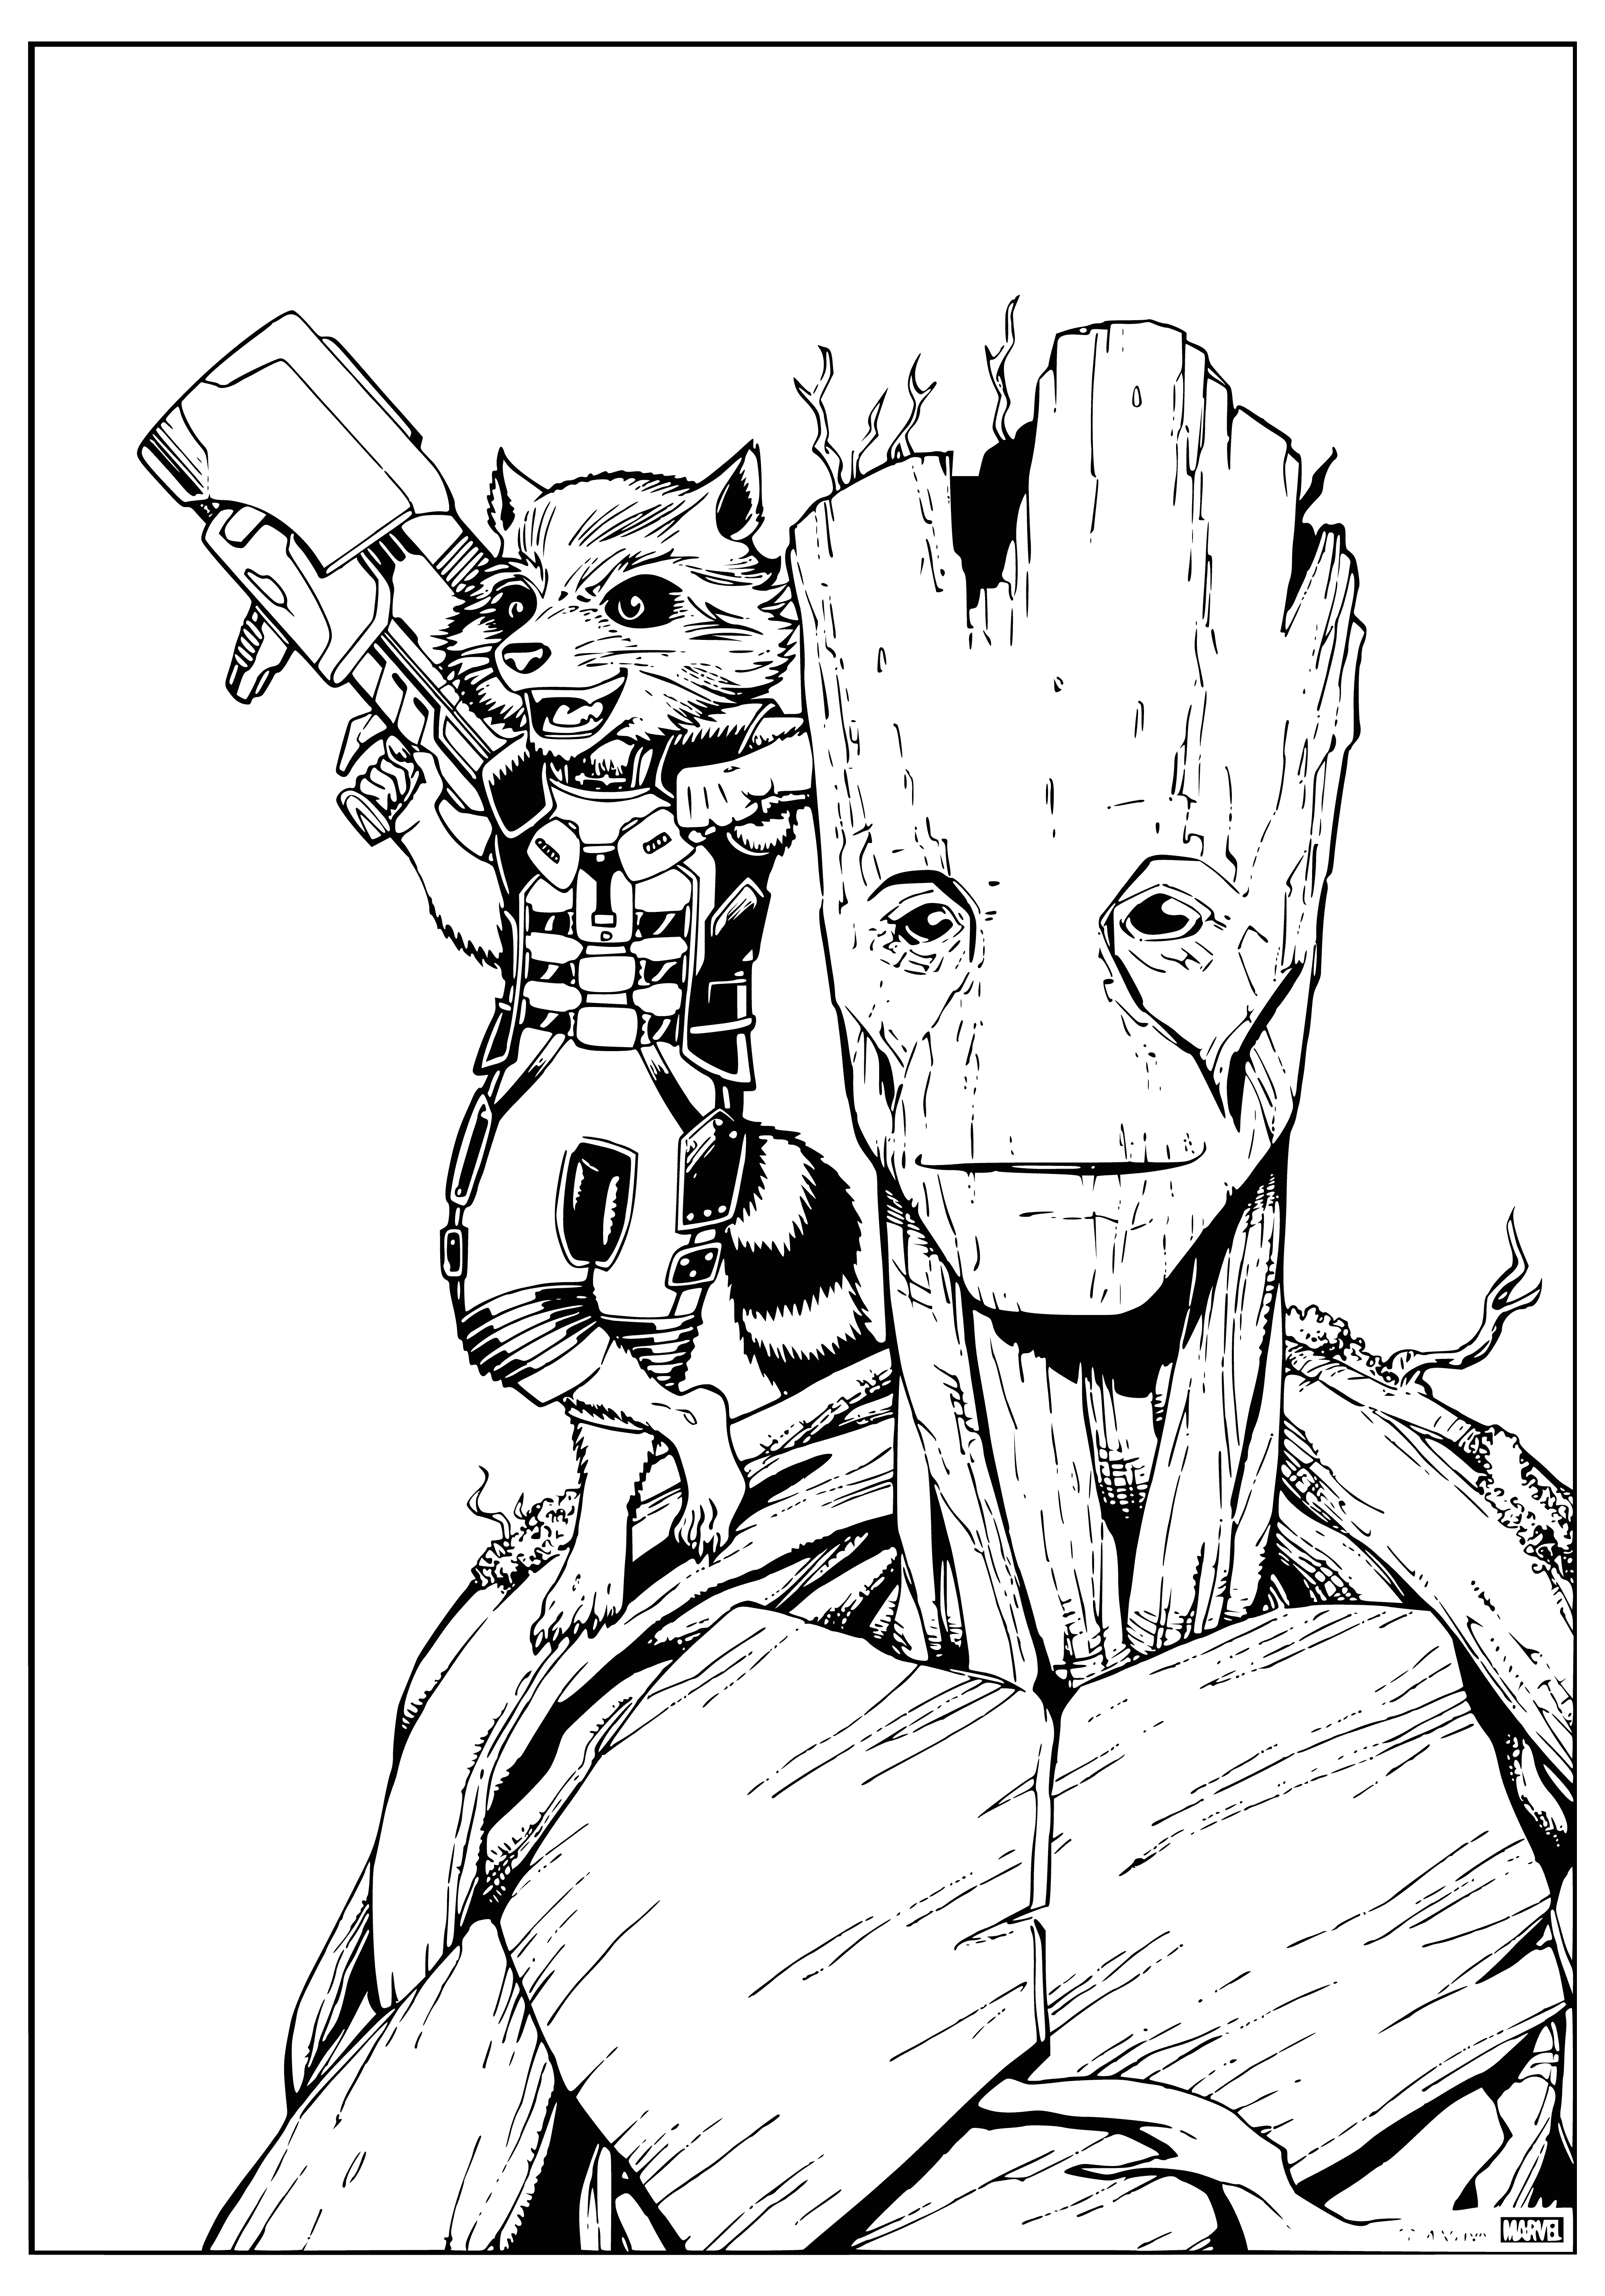 coloring page: Rocket & Grut are Guardians of the Galaxy, a superhero team protecting the galaxy from evil. Rocket is a gun-wielding raccoon & Grut a giant tree creature.